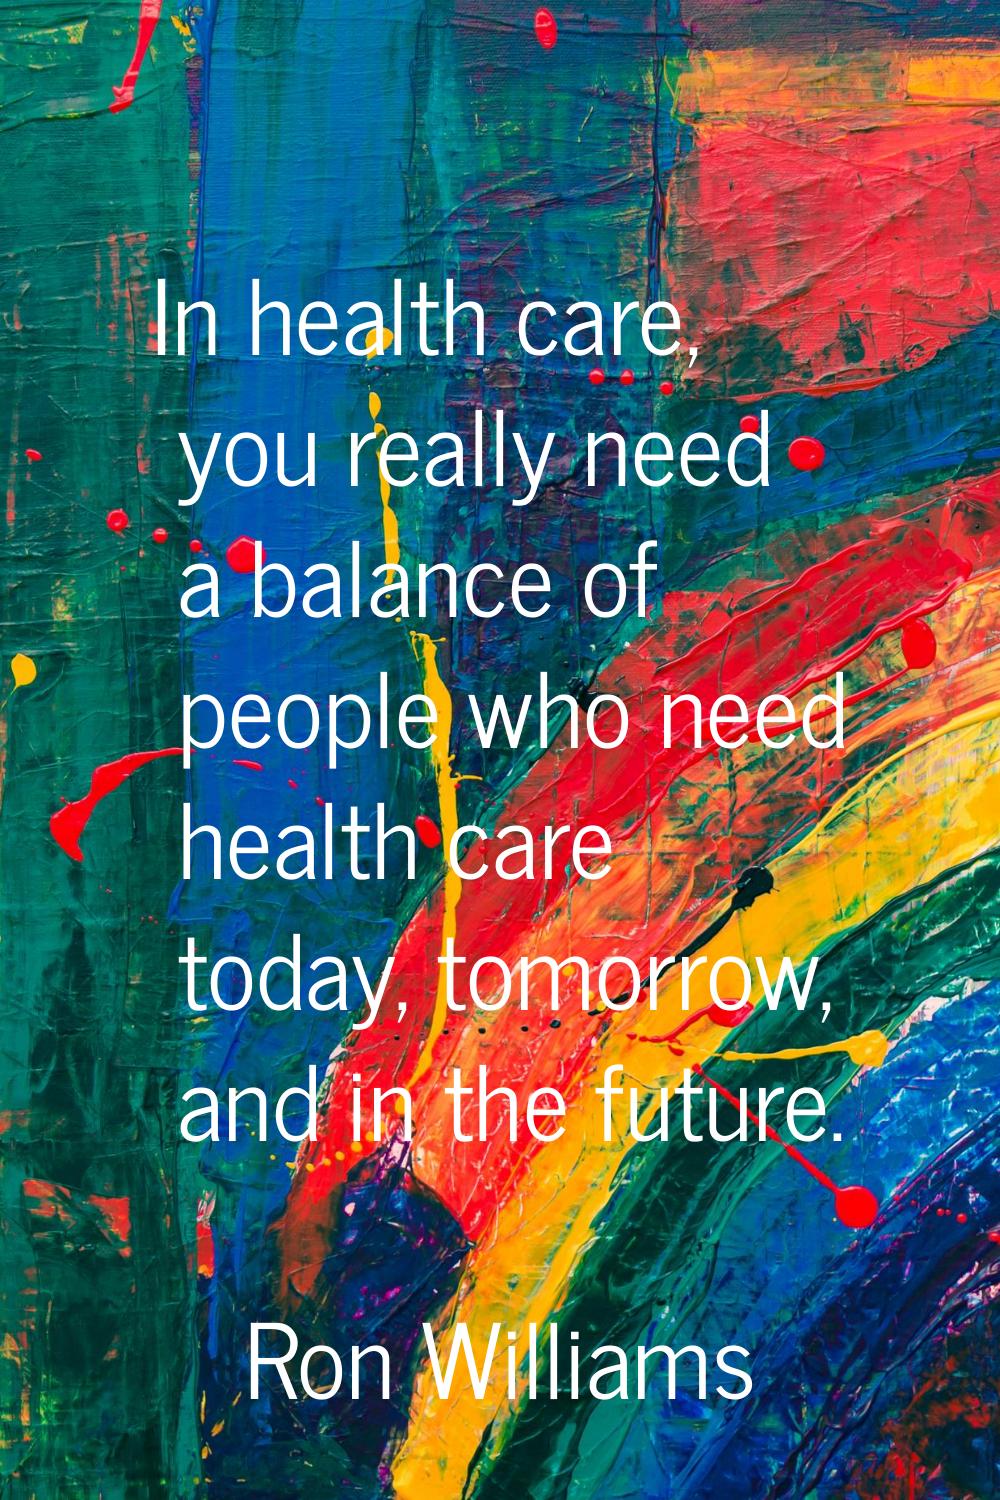 In health care, you really need a balance of people who need health care today, tomorrow, and in th